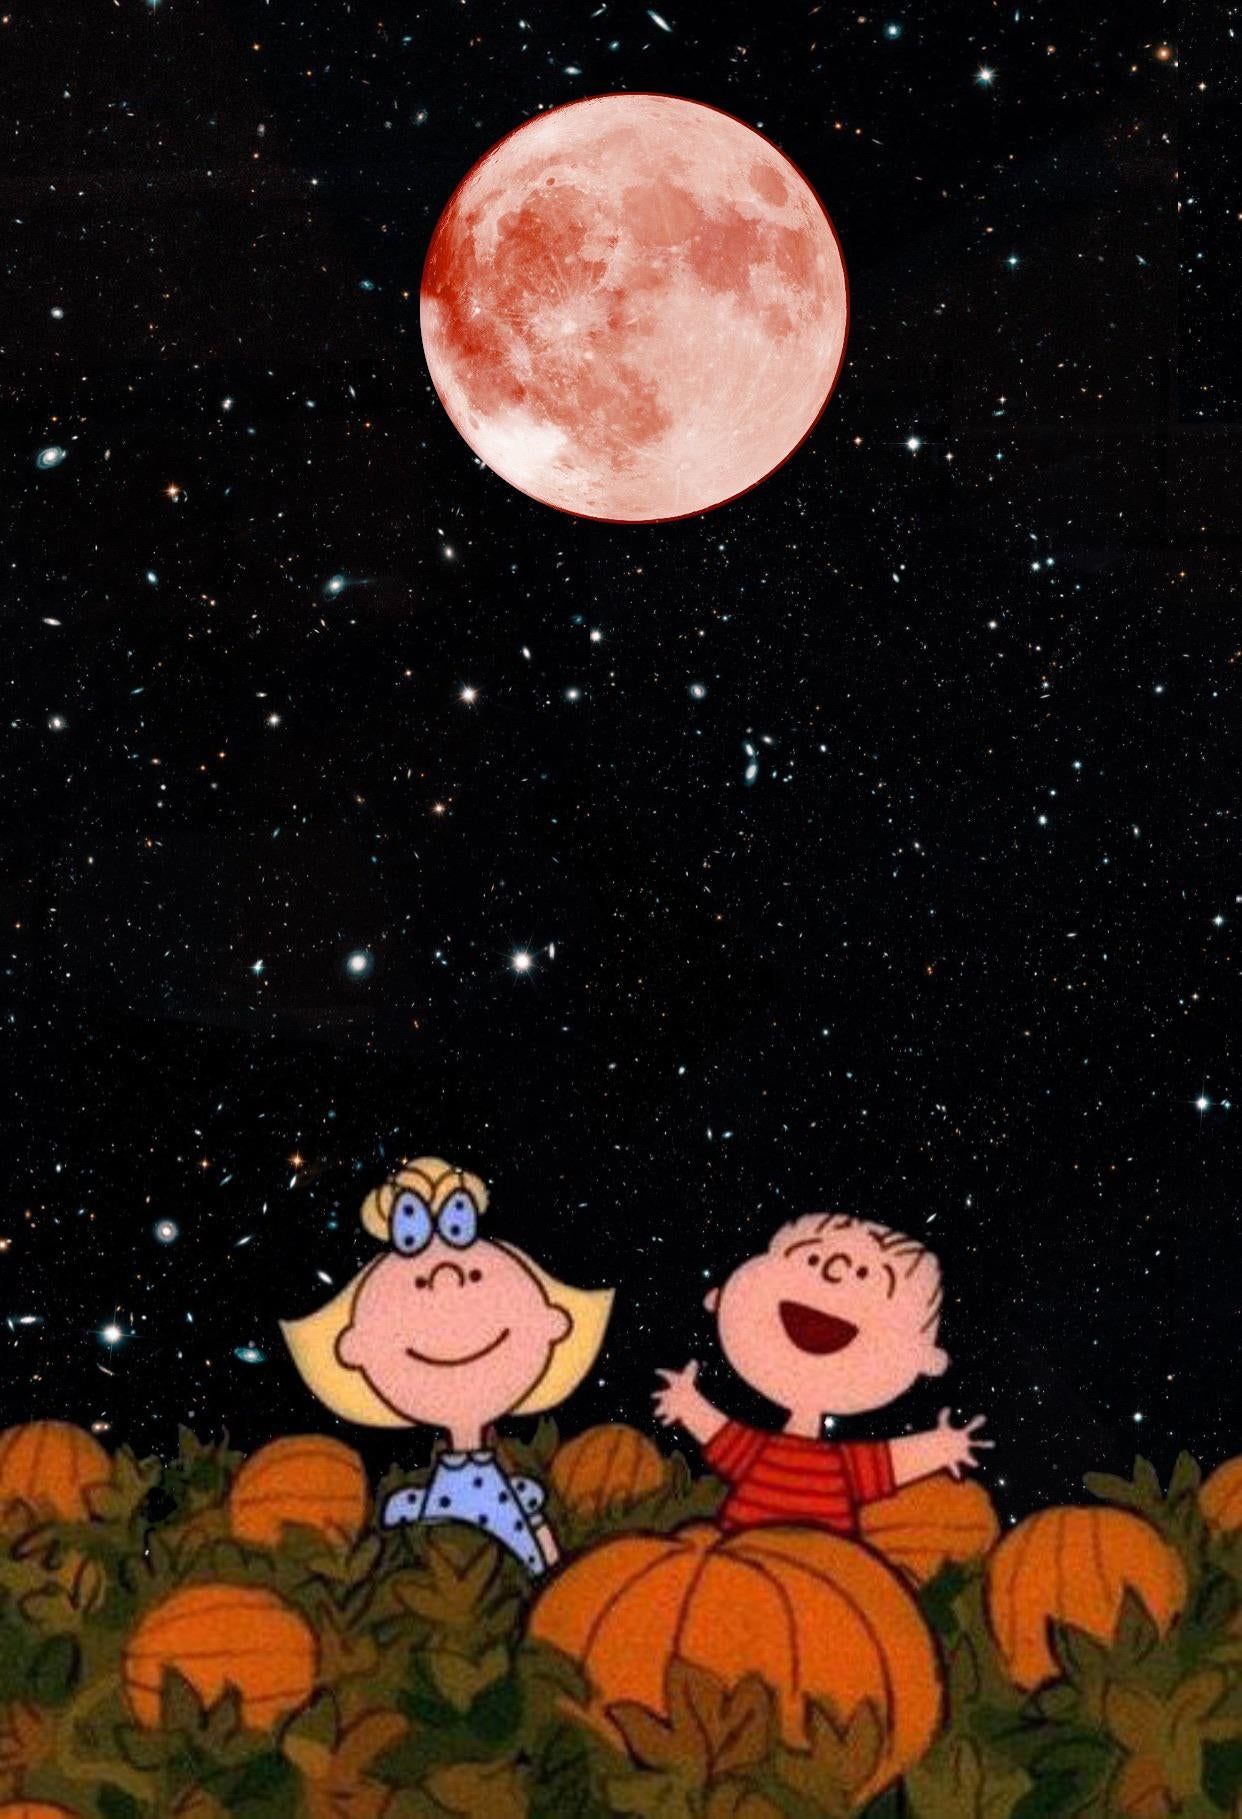 Two children looking up at the sky with a full moon - Charlie Brown